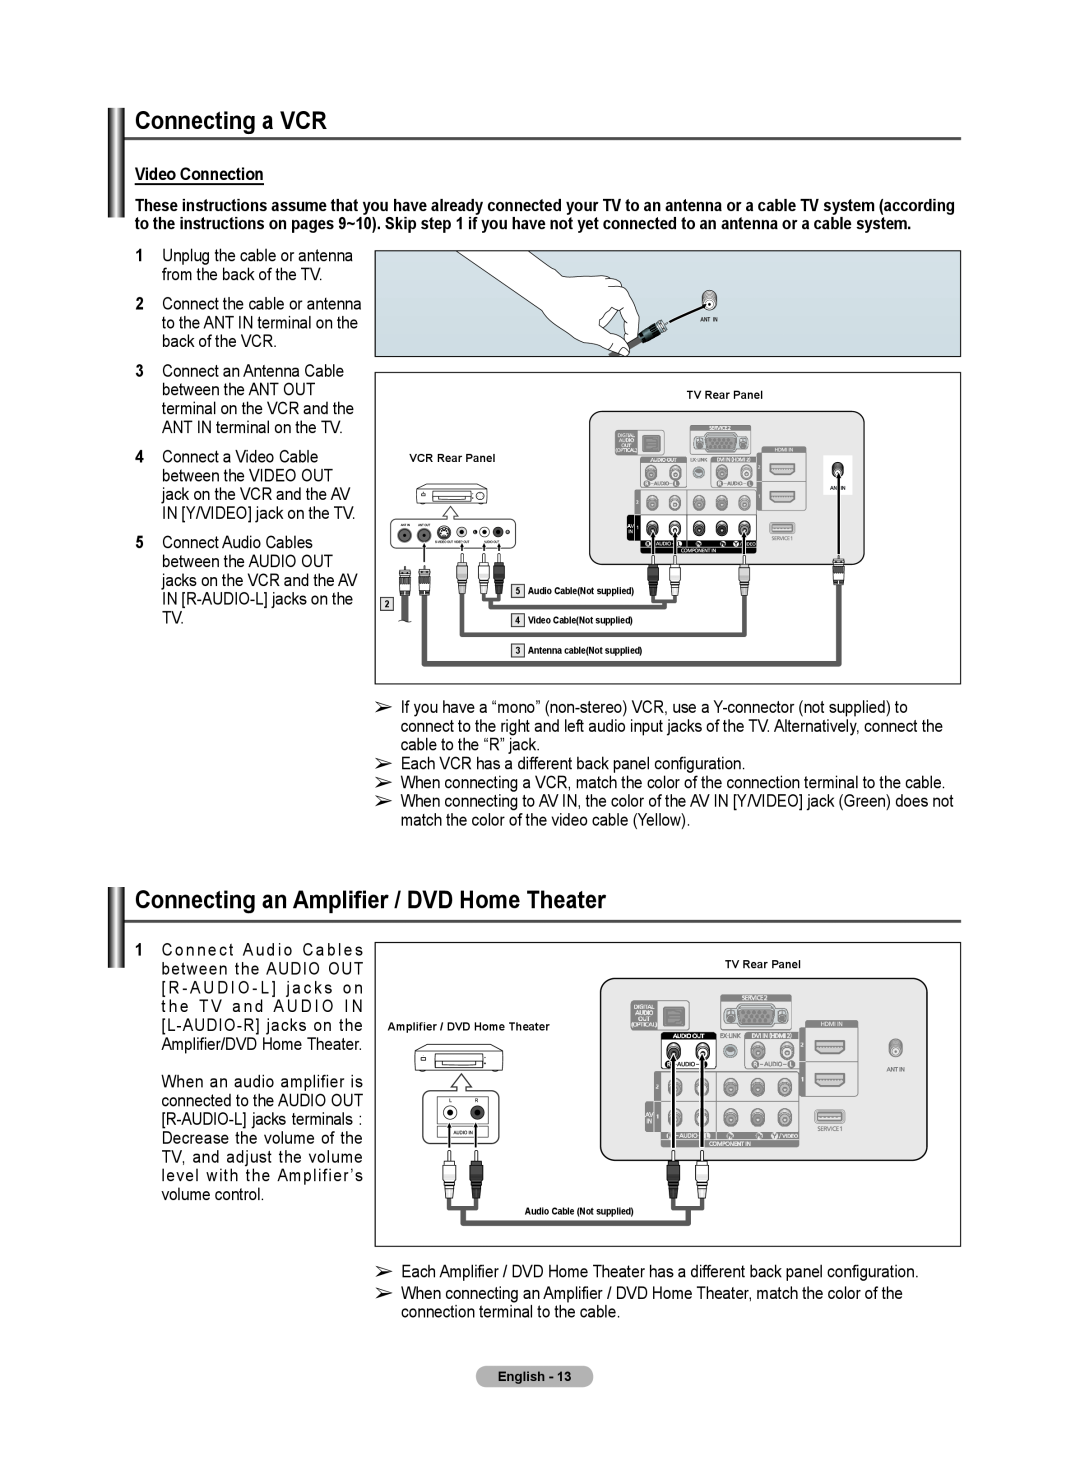 Samsung 510 user manual Connecting a VCR, Connecting an Amplifier / DVD Home Theater, Video Connection 